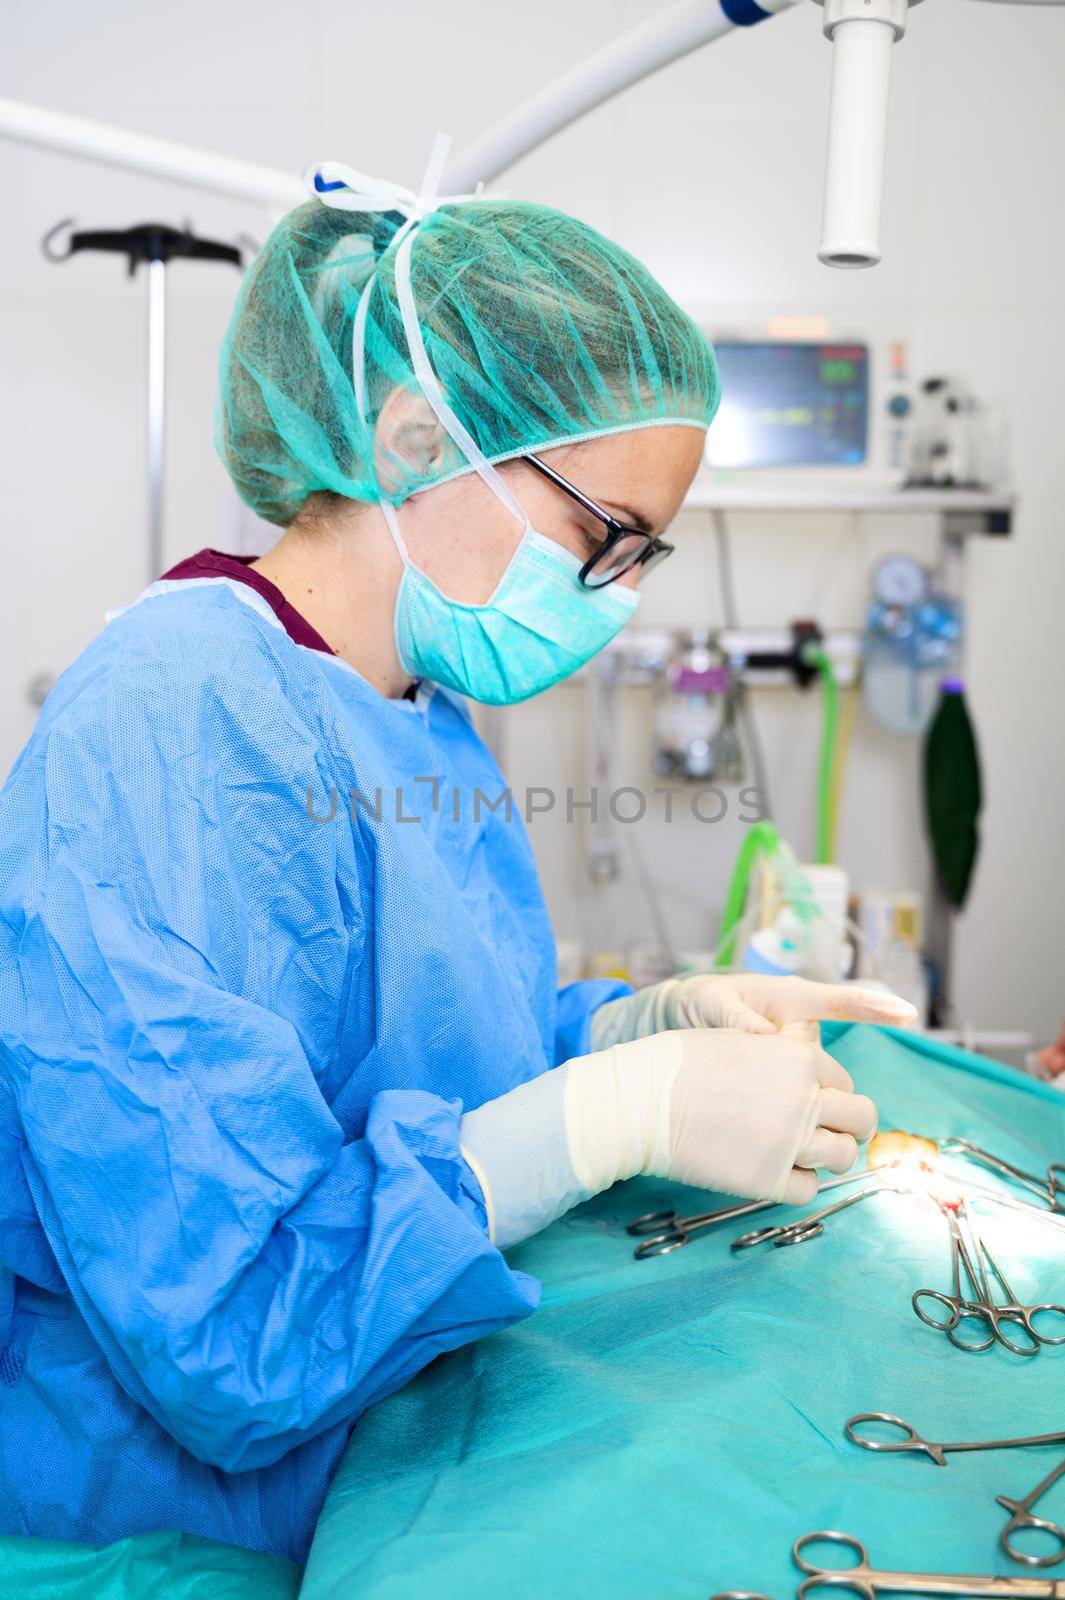 Surgery operation. Close up of surgeon hands stitching the wound after operating. Surgical treatment concept. Surgeon hands performing operation with surgery tools. High quality photography